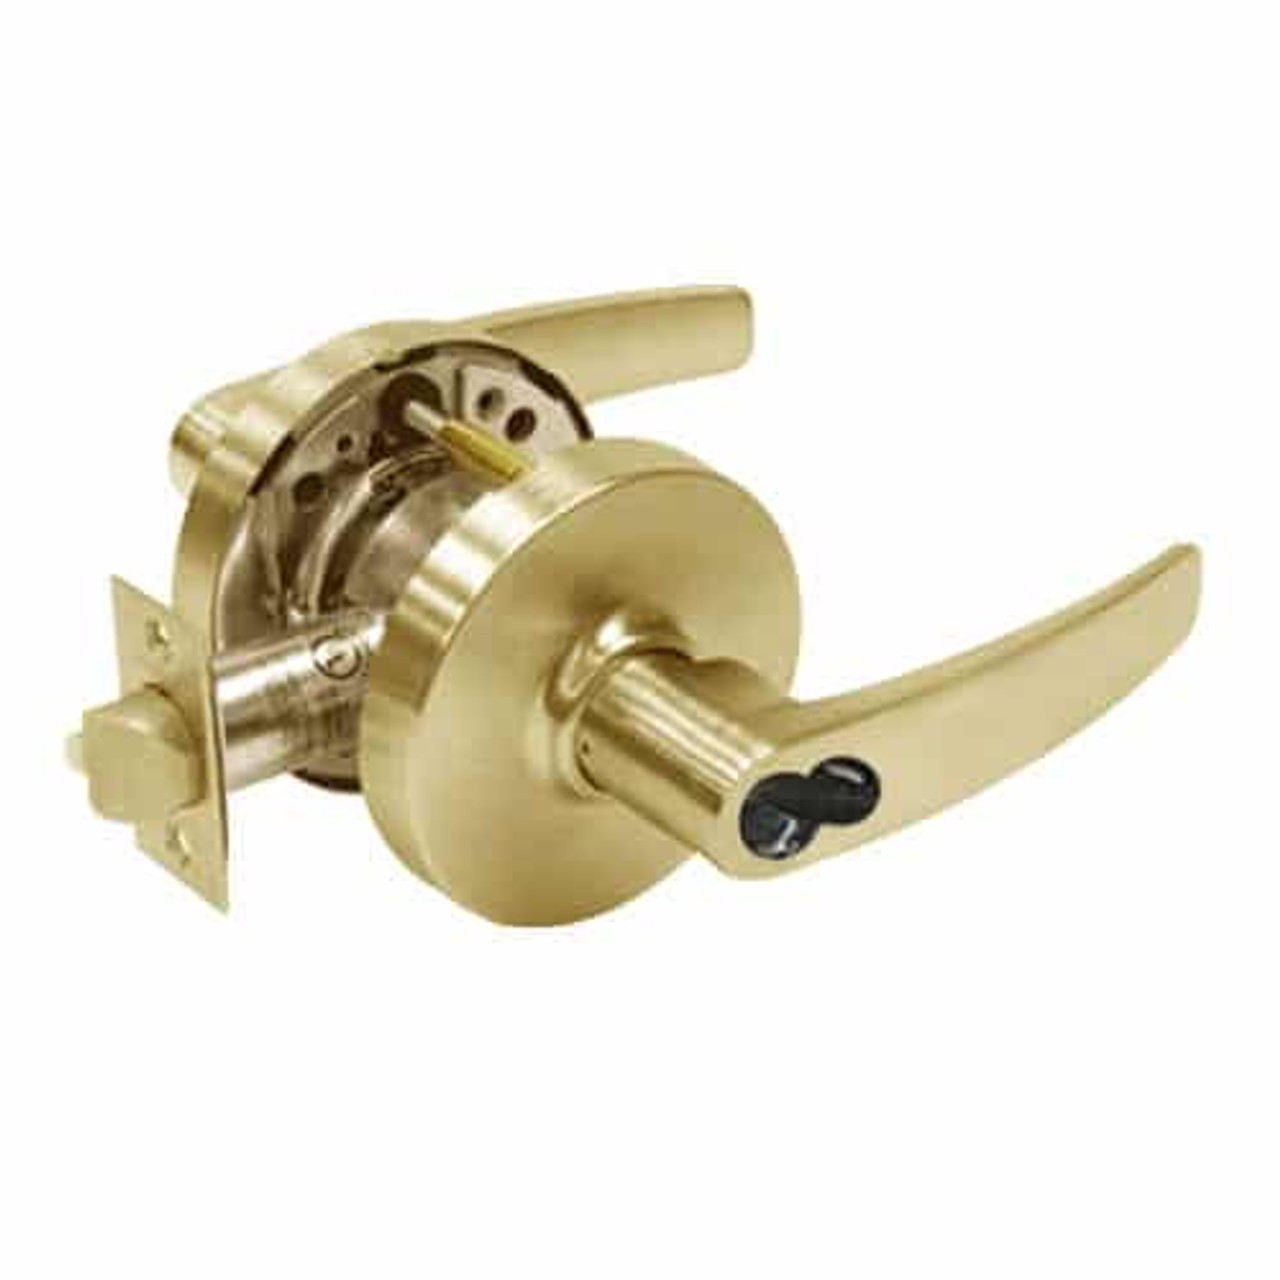 2860-10G16-LB-04 Sargent 10 Line Cylindrical Classroom Locks with B Lever Design and L Rose Prepped for LFIC in Satin Brass